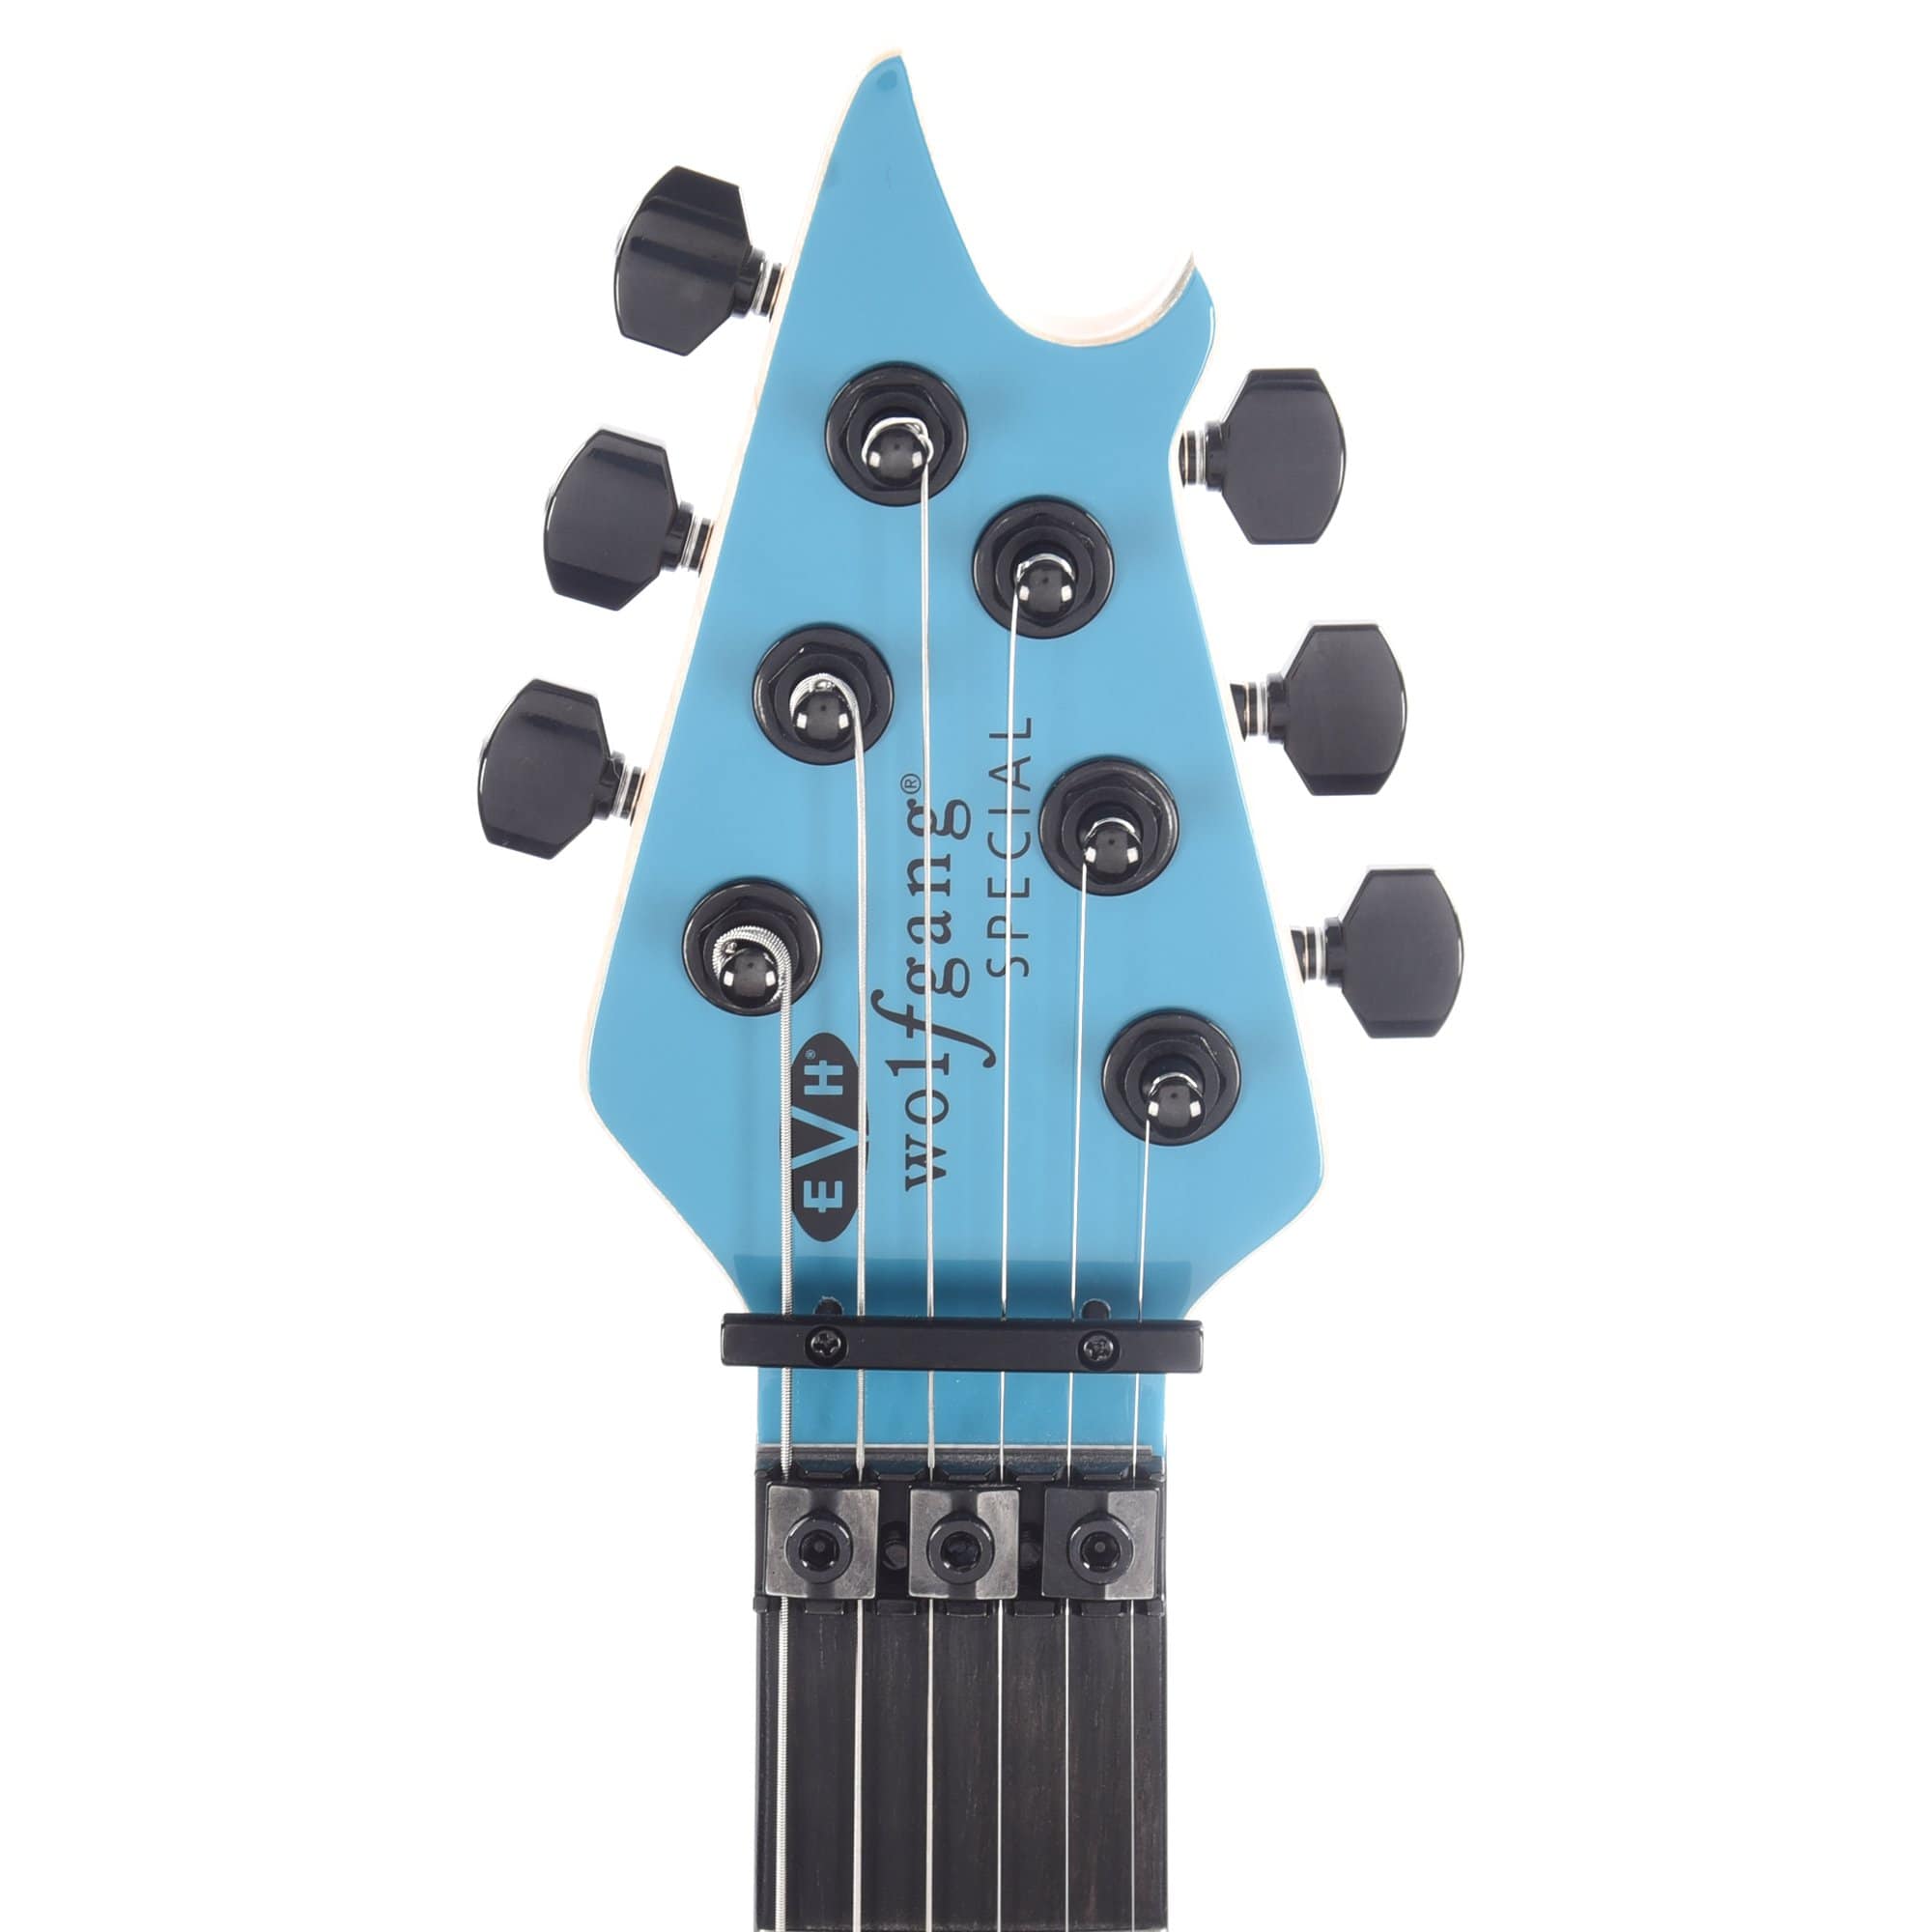 EVH Wolfgang Special Miami Blue